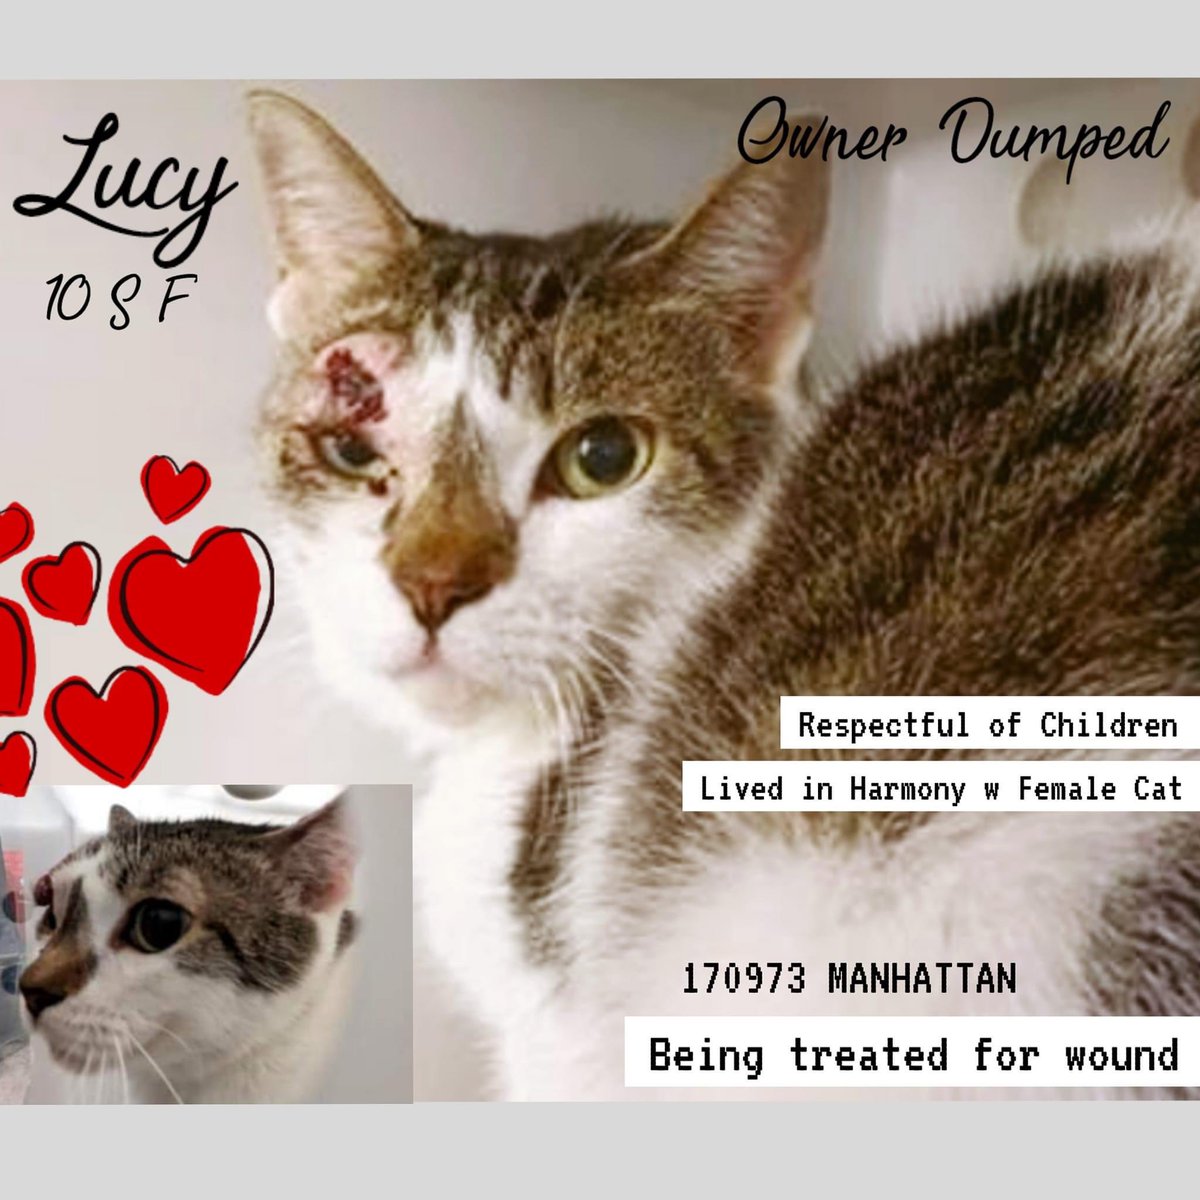 🆘 #URGENT #NYC #NYCACC #CATS  LUCY is on the “emergency placement” list and needs foster/rescue/adopter by 6/15 @ NOON.  

PLEASE RT-adopt-foster! #TeamKittySOS #AdoptDontShop #CatsOfTwitter #cutecats newhope.shelterbuddy.com/Animal/Profile…